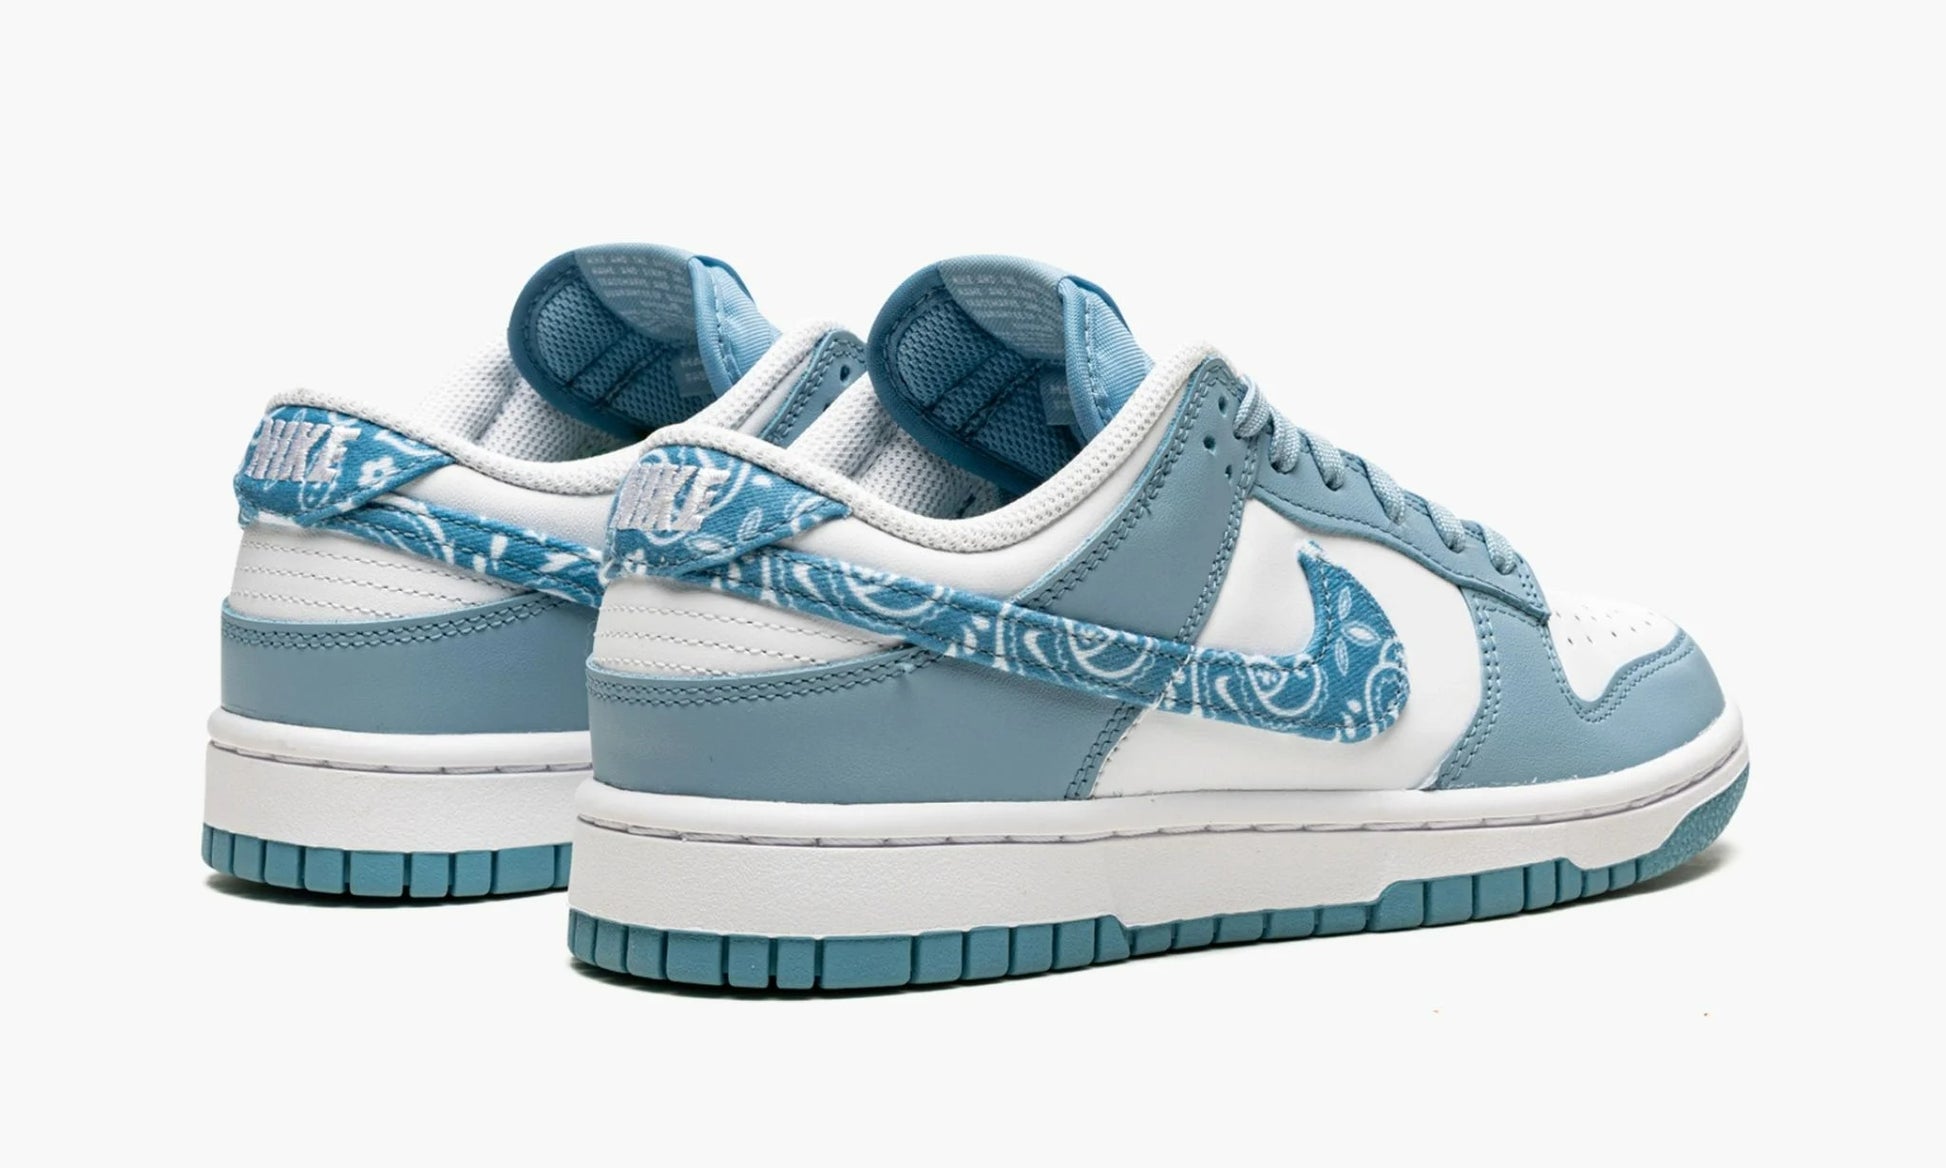 Dunk Low Essential Paisley Pack Worn Blue - DH4401 101